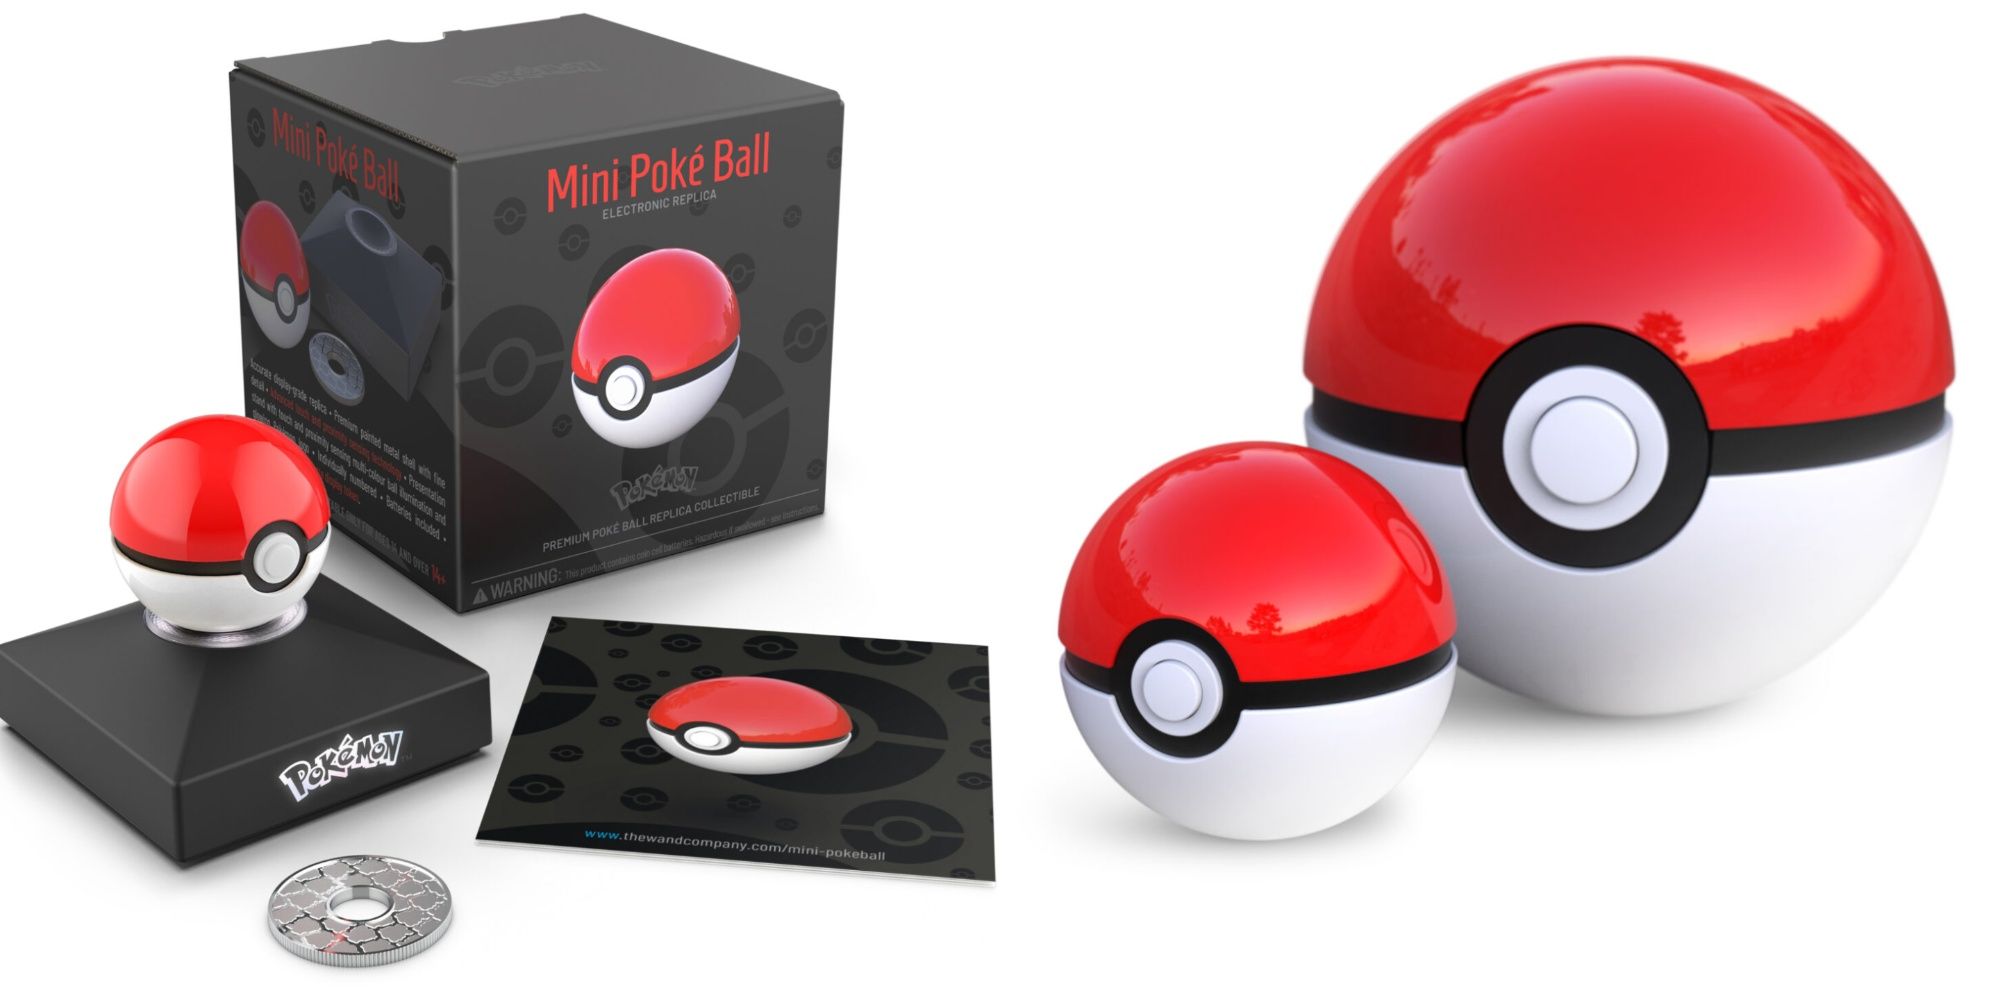 the wand company's mini poke ball on a stand, with its packaging, and next to a full size replica